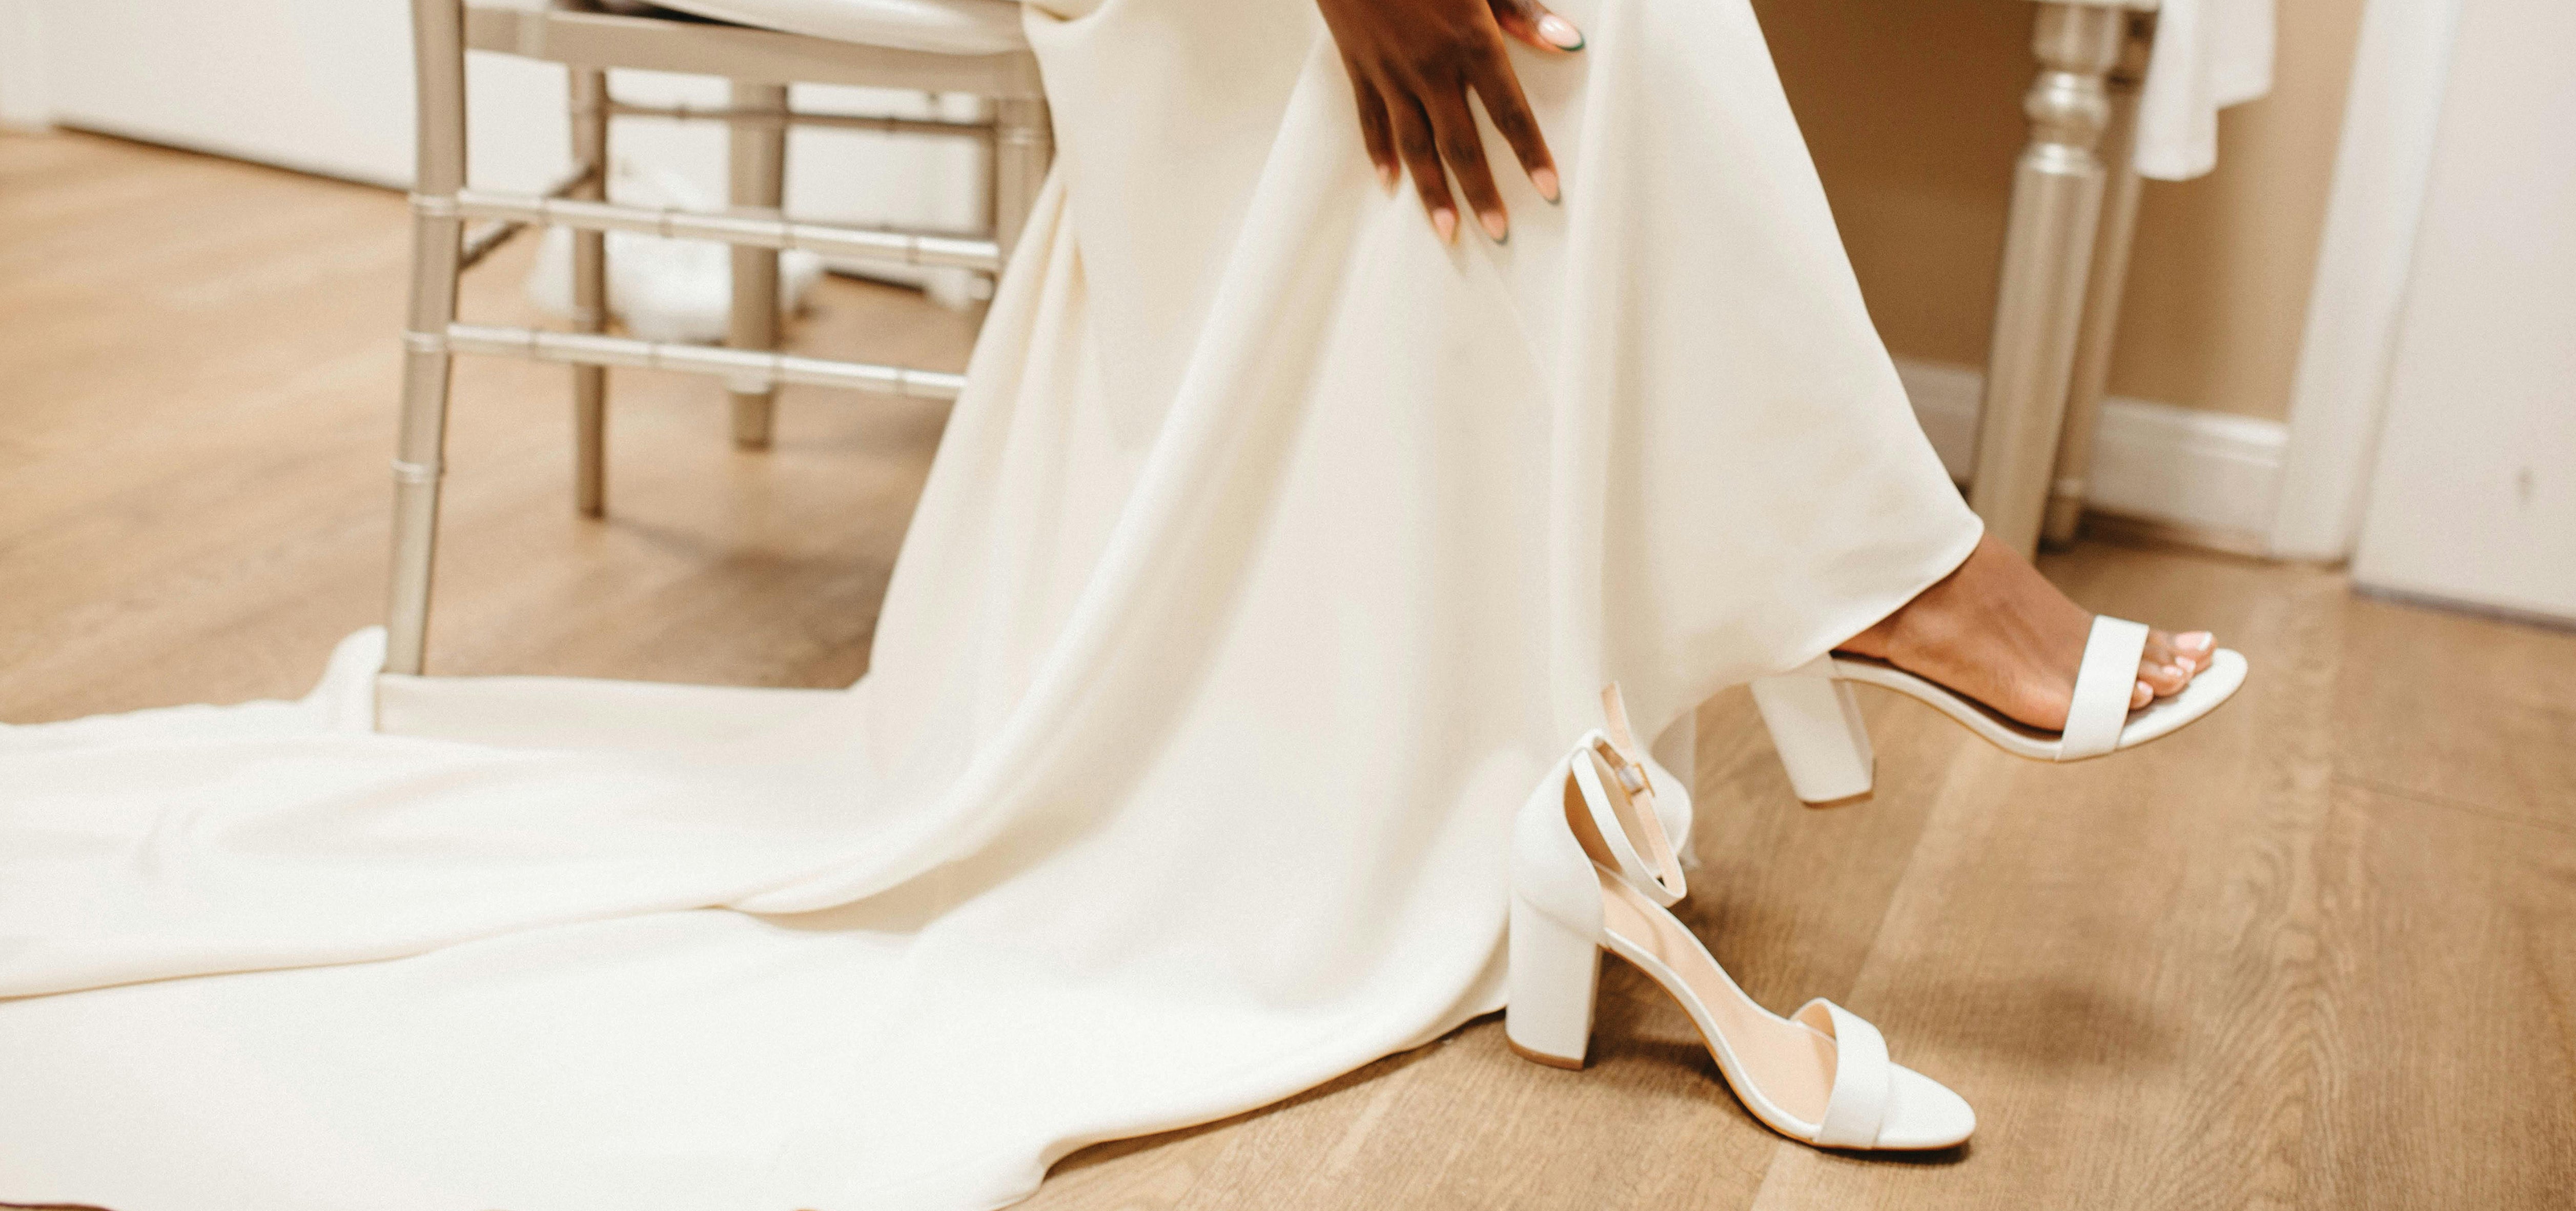 Step into Forever - Choosing the Perfect Wedding Shoes for Your Big Day